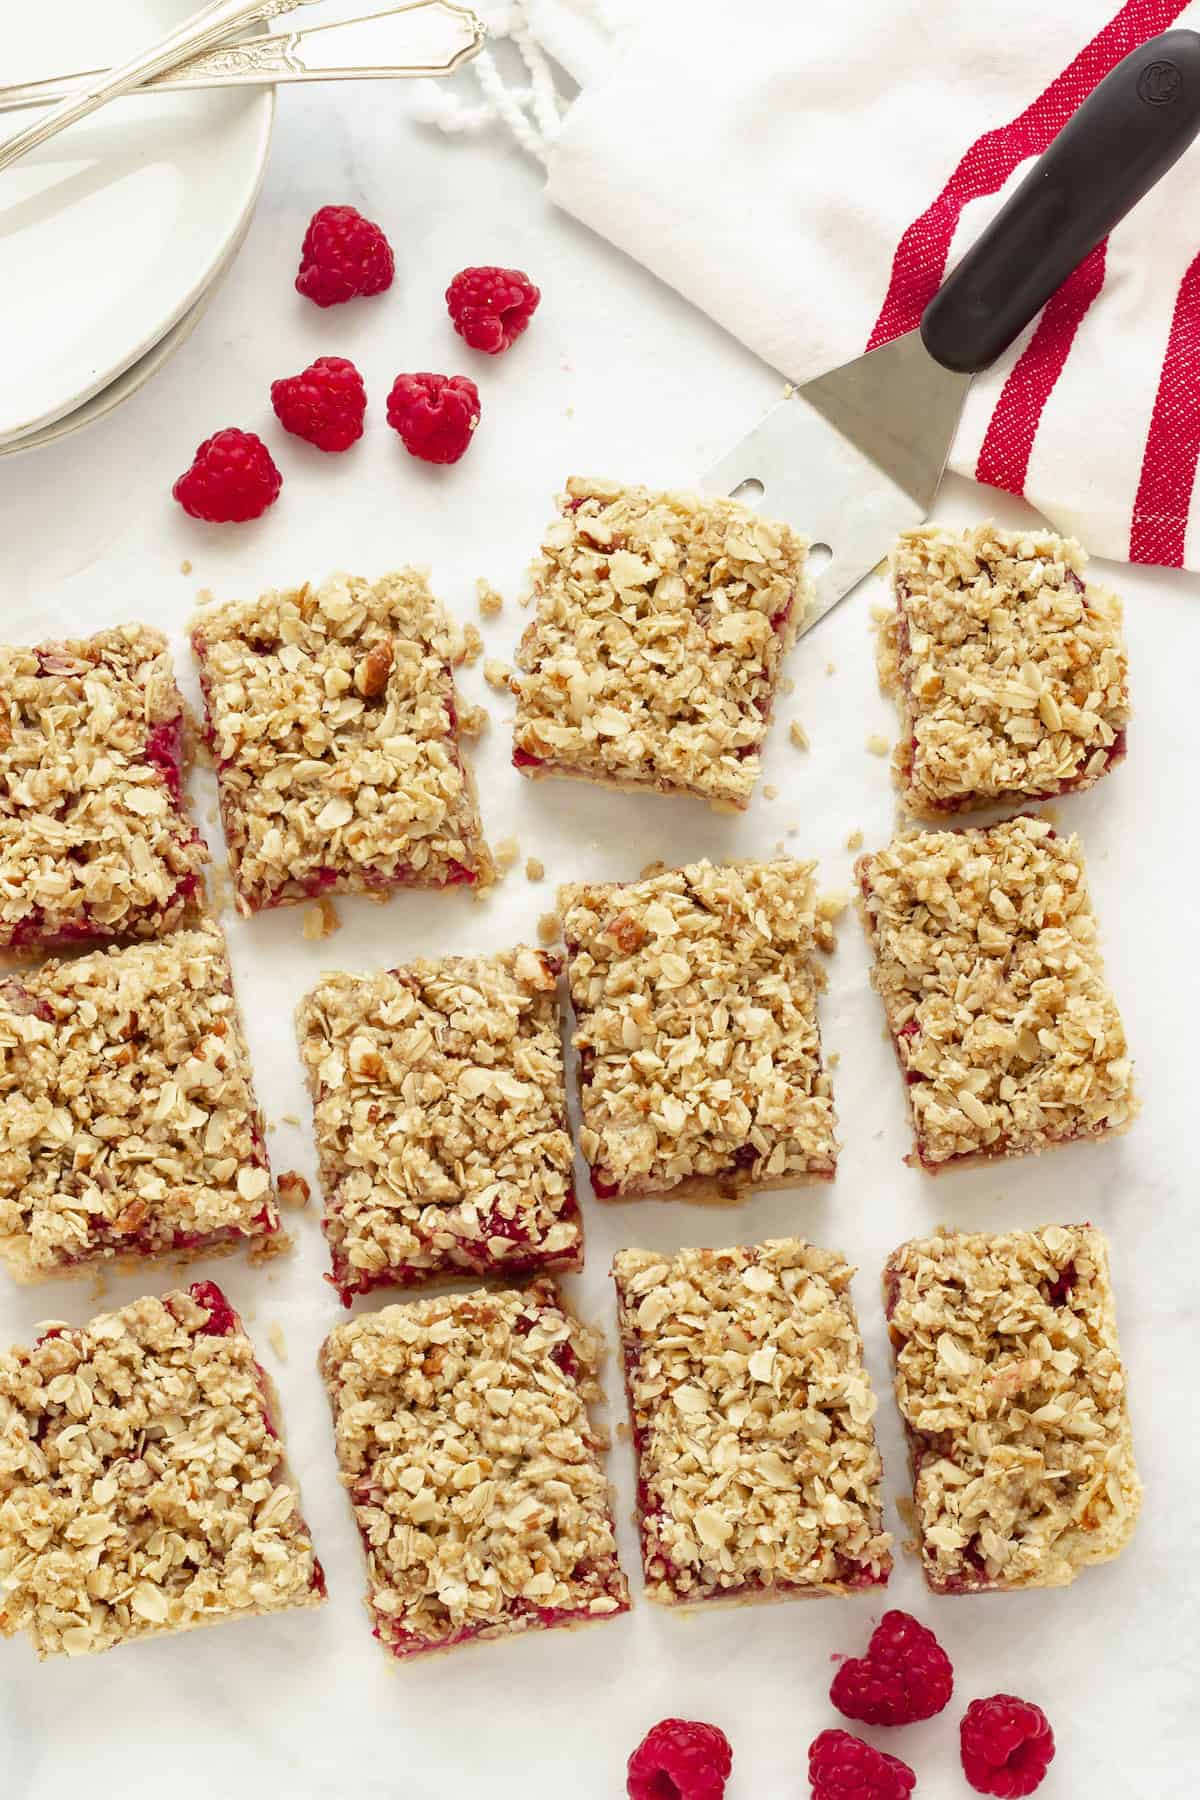 raspberry oatmeal bars cut into 12 squares. A spatula is scooping up one bar. Fresh raspberries, white plate and a red and white stripe napkin in the background.